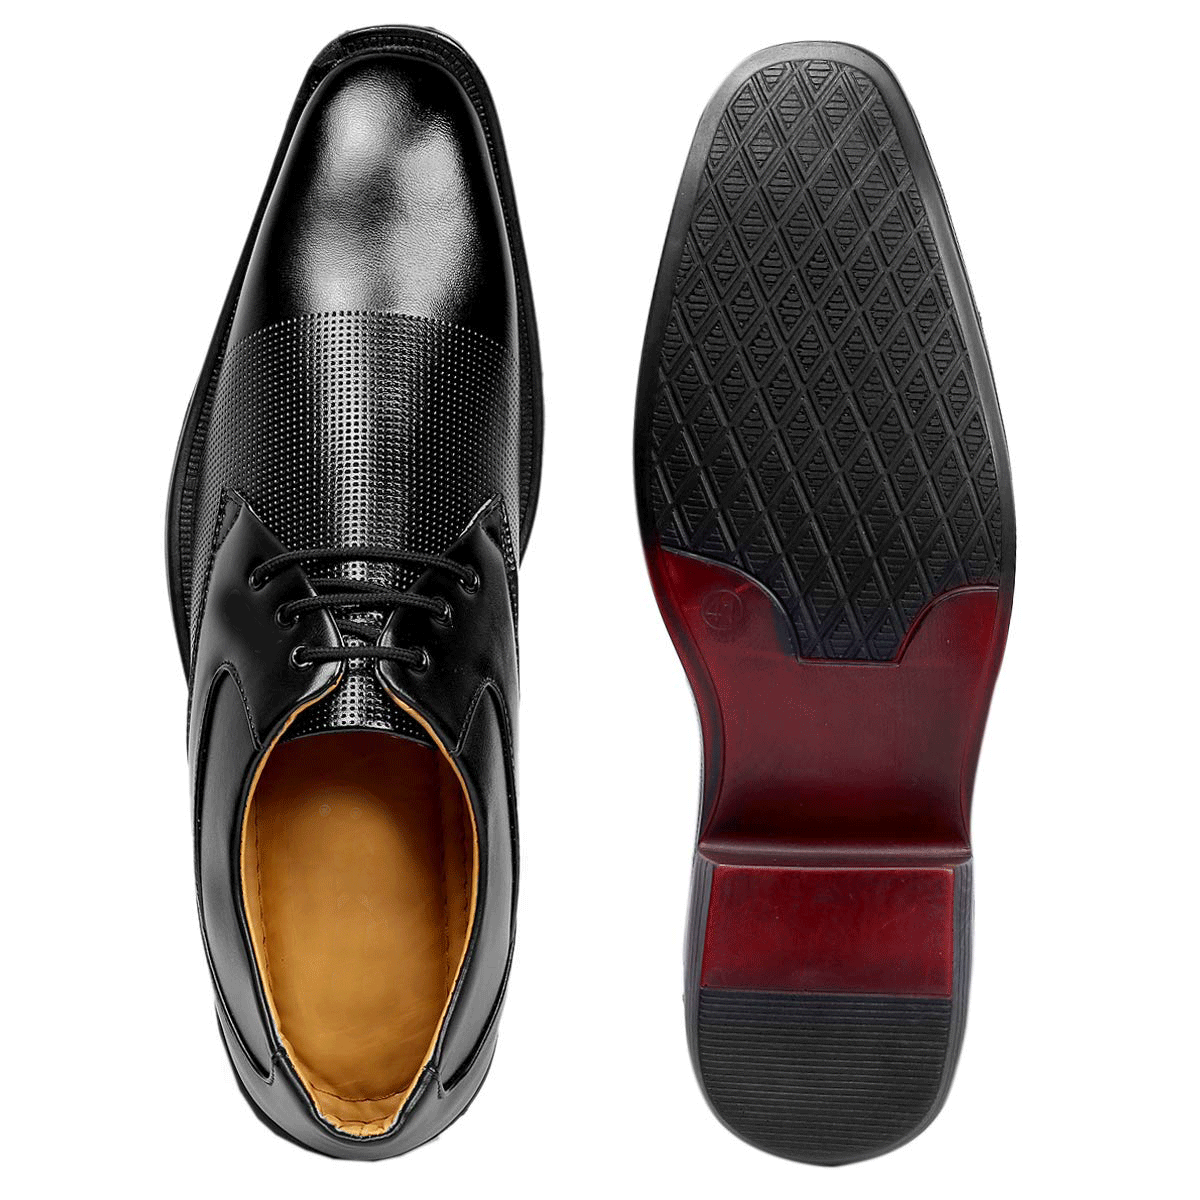 Classy Black Oxford Formal, Casual And Outdoor Shoes With High Heel-JonasParamount